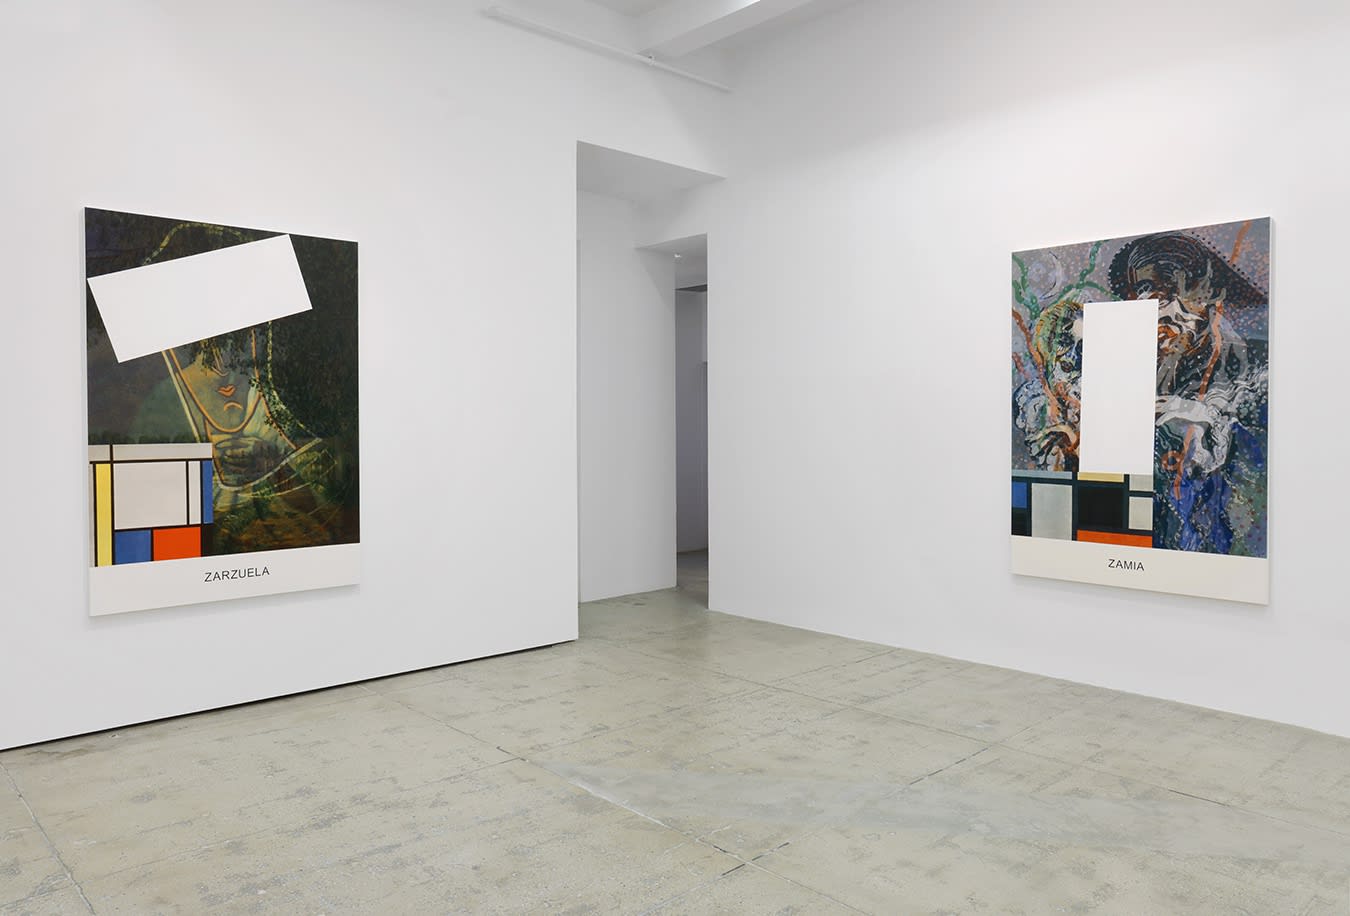 2 large colorful paintings with text and geometric shapes hang in a white gallery space.